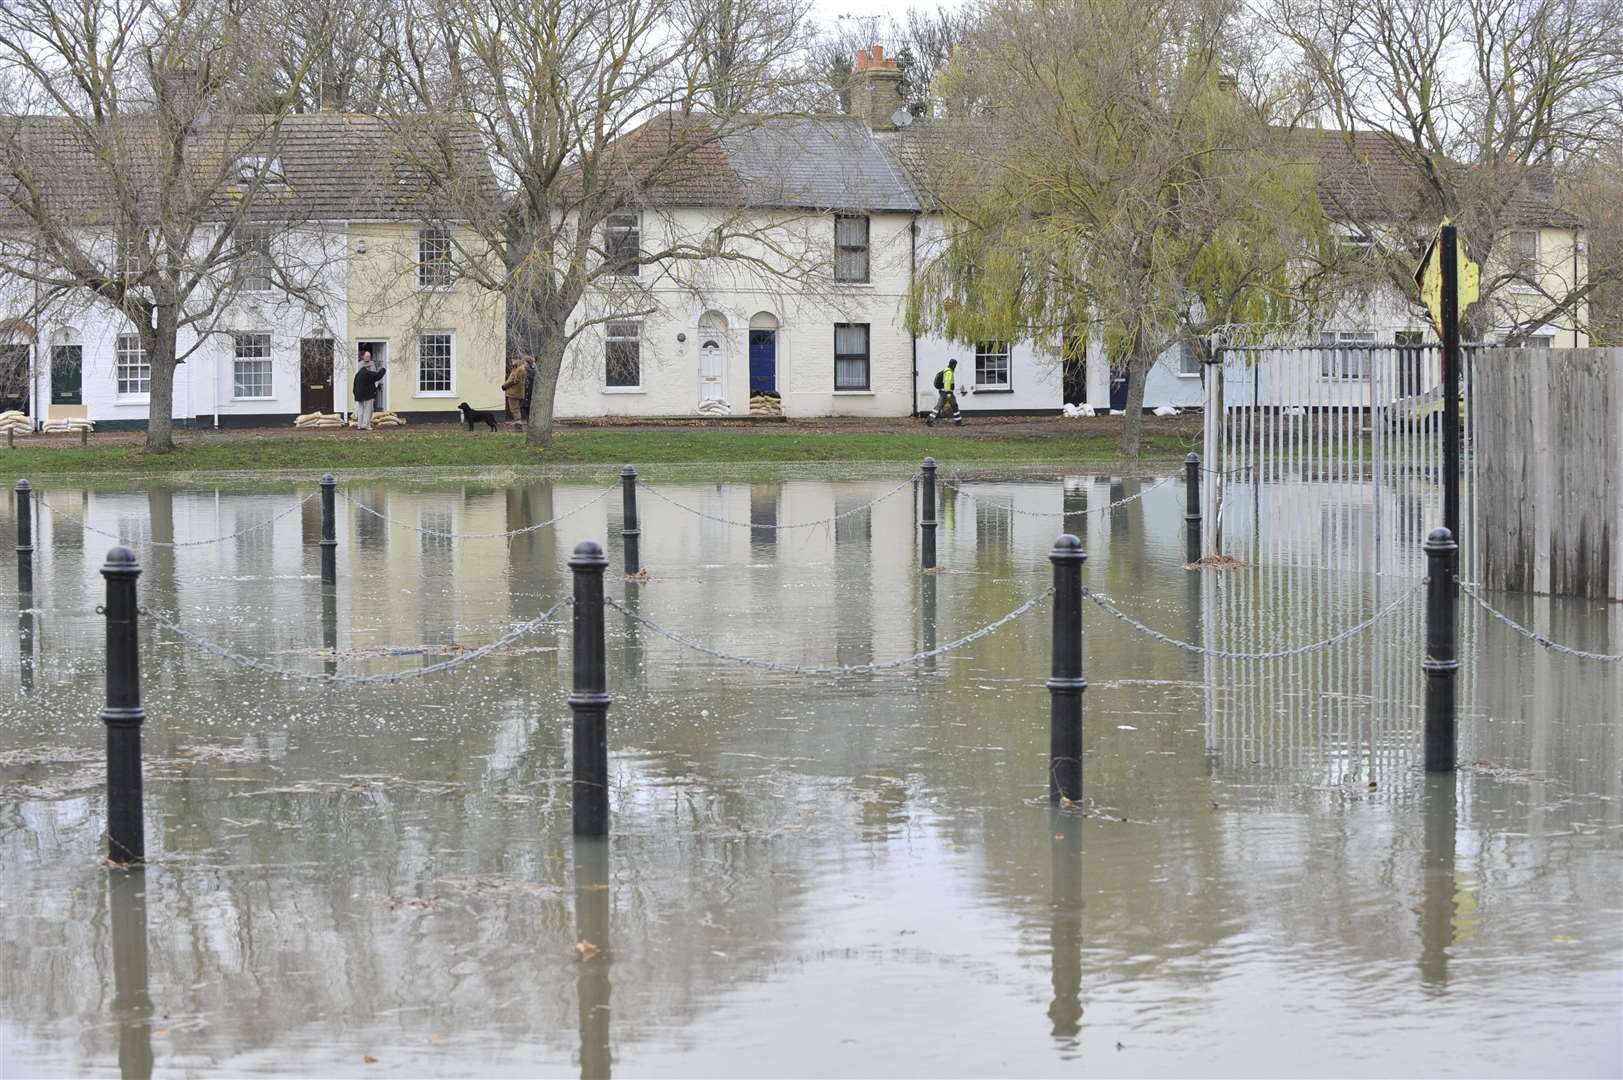 The flood in 2013 caused thousands of pounds worth of damage. Picture: Tony Flashman FM2938256 (15180634)